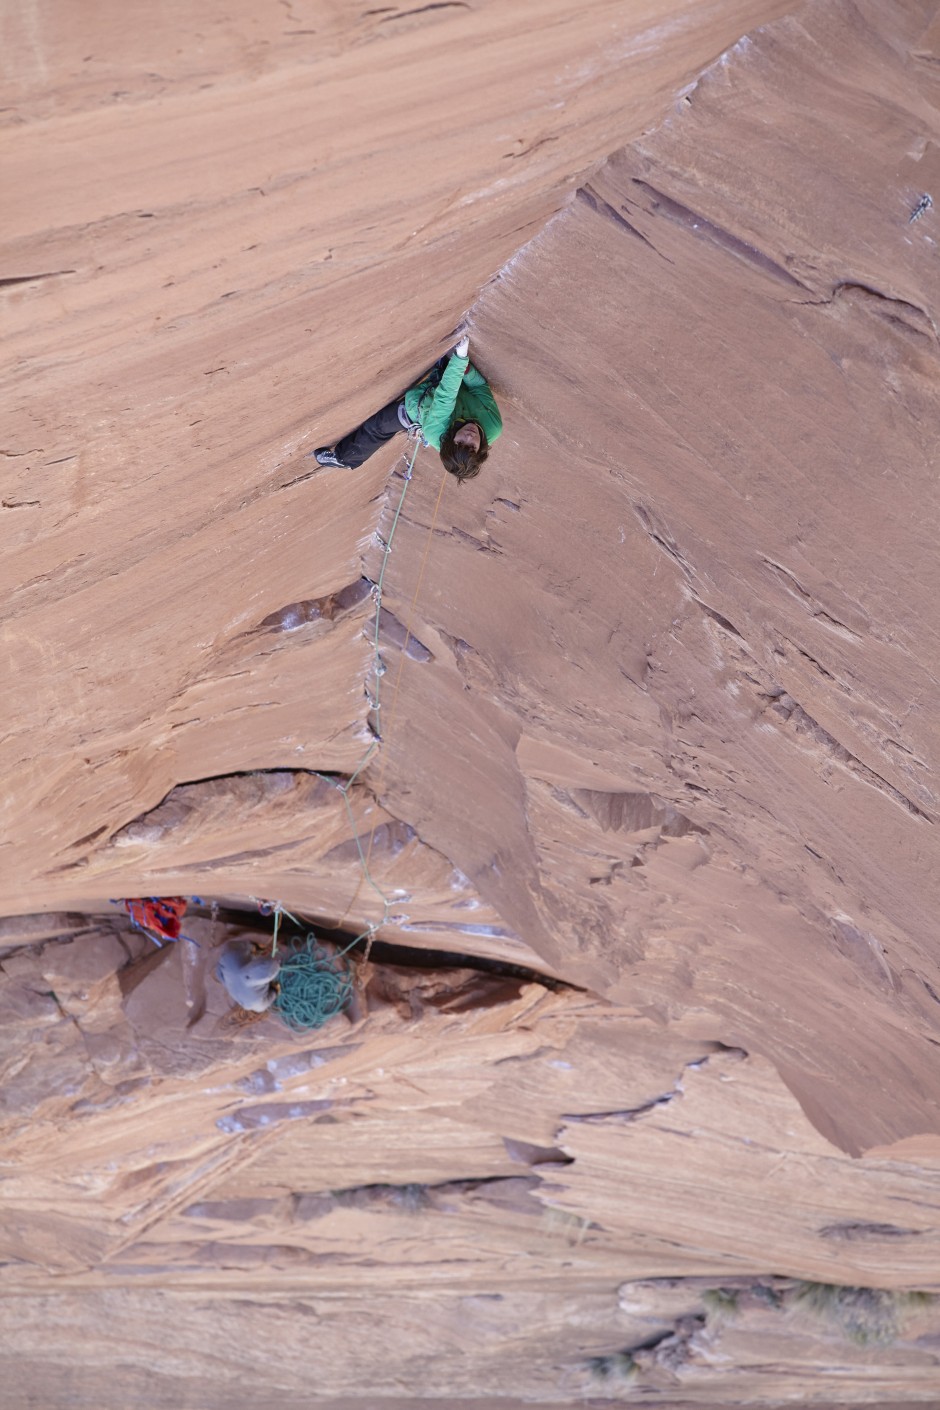 katie lambert leads pitch 5 of moonlight buttress.  the first f the sustained dihedral pitches leading off the "rocker blocker"  of moonlight buttress, zion national park